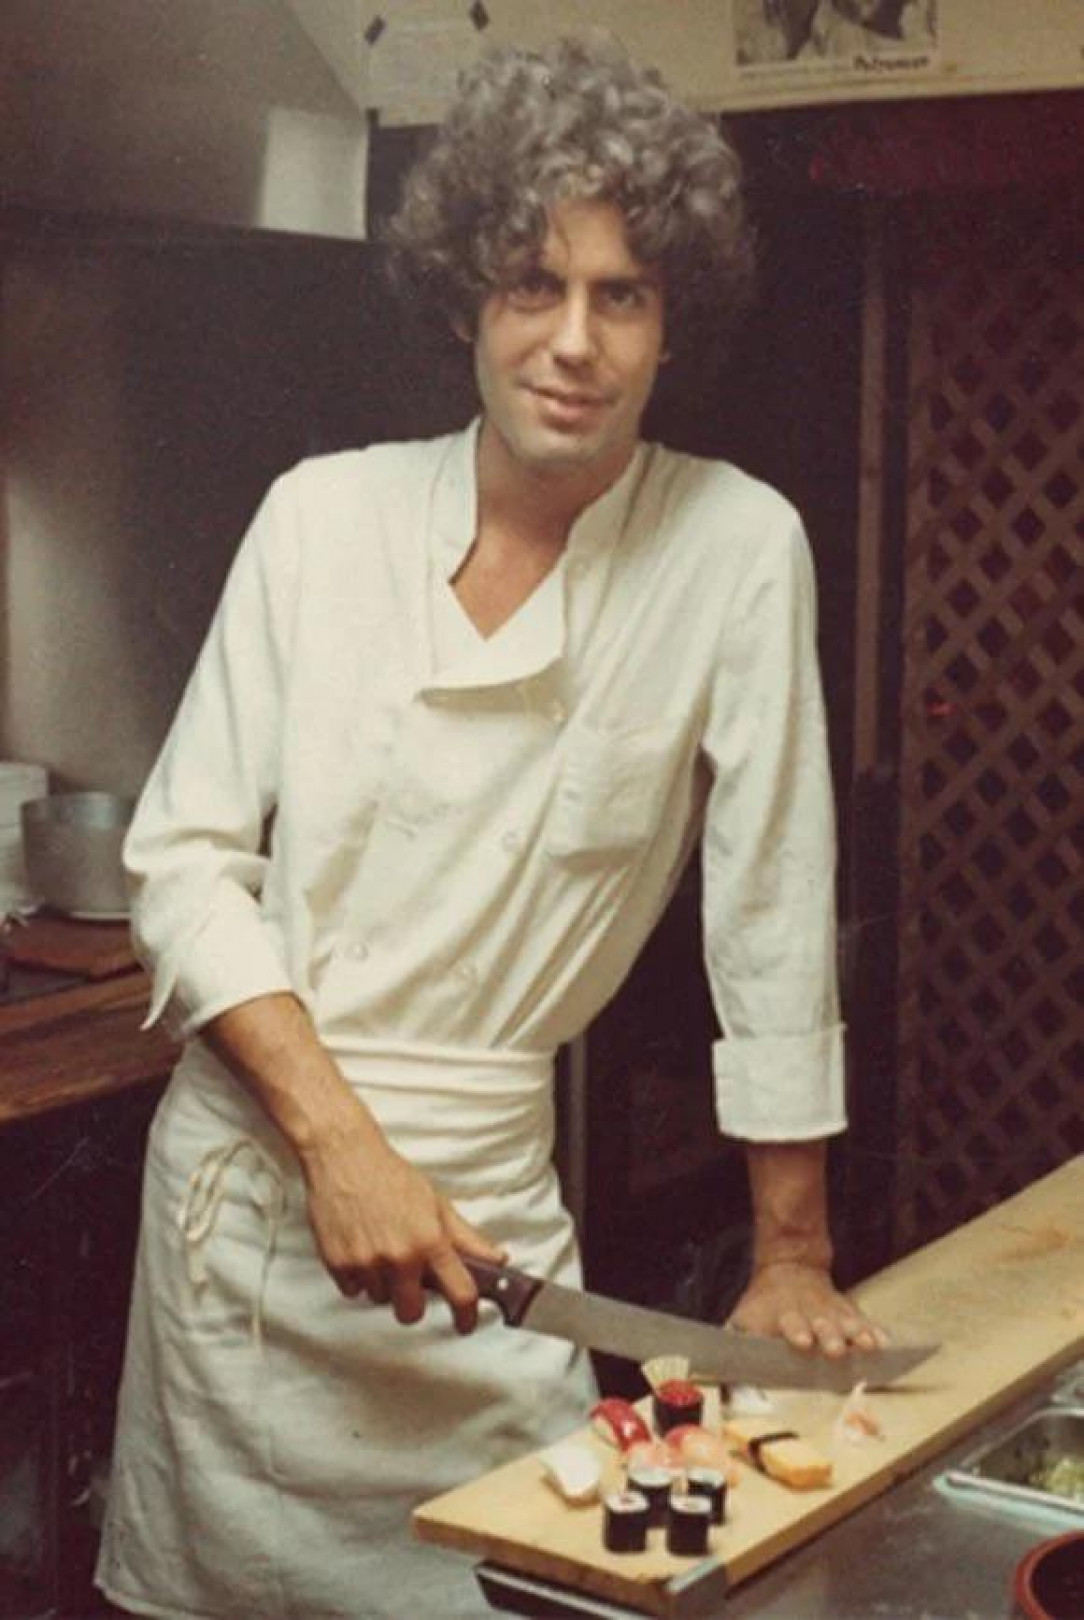 Anthony Bourdain (1980s), today would have been his 66th birthday